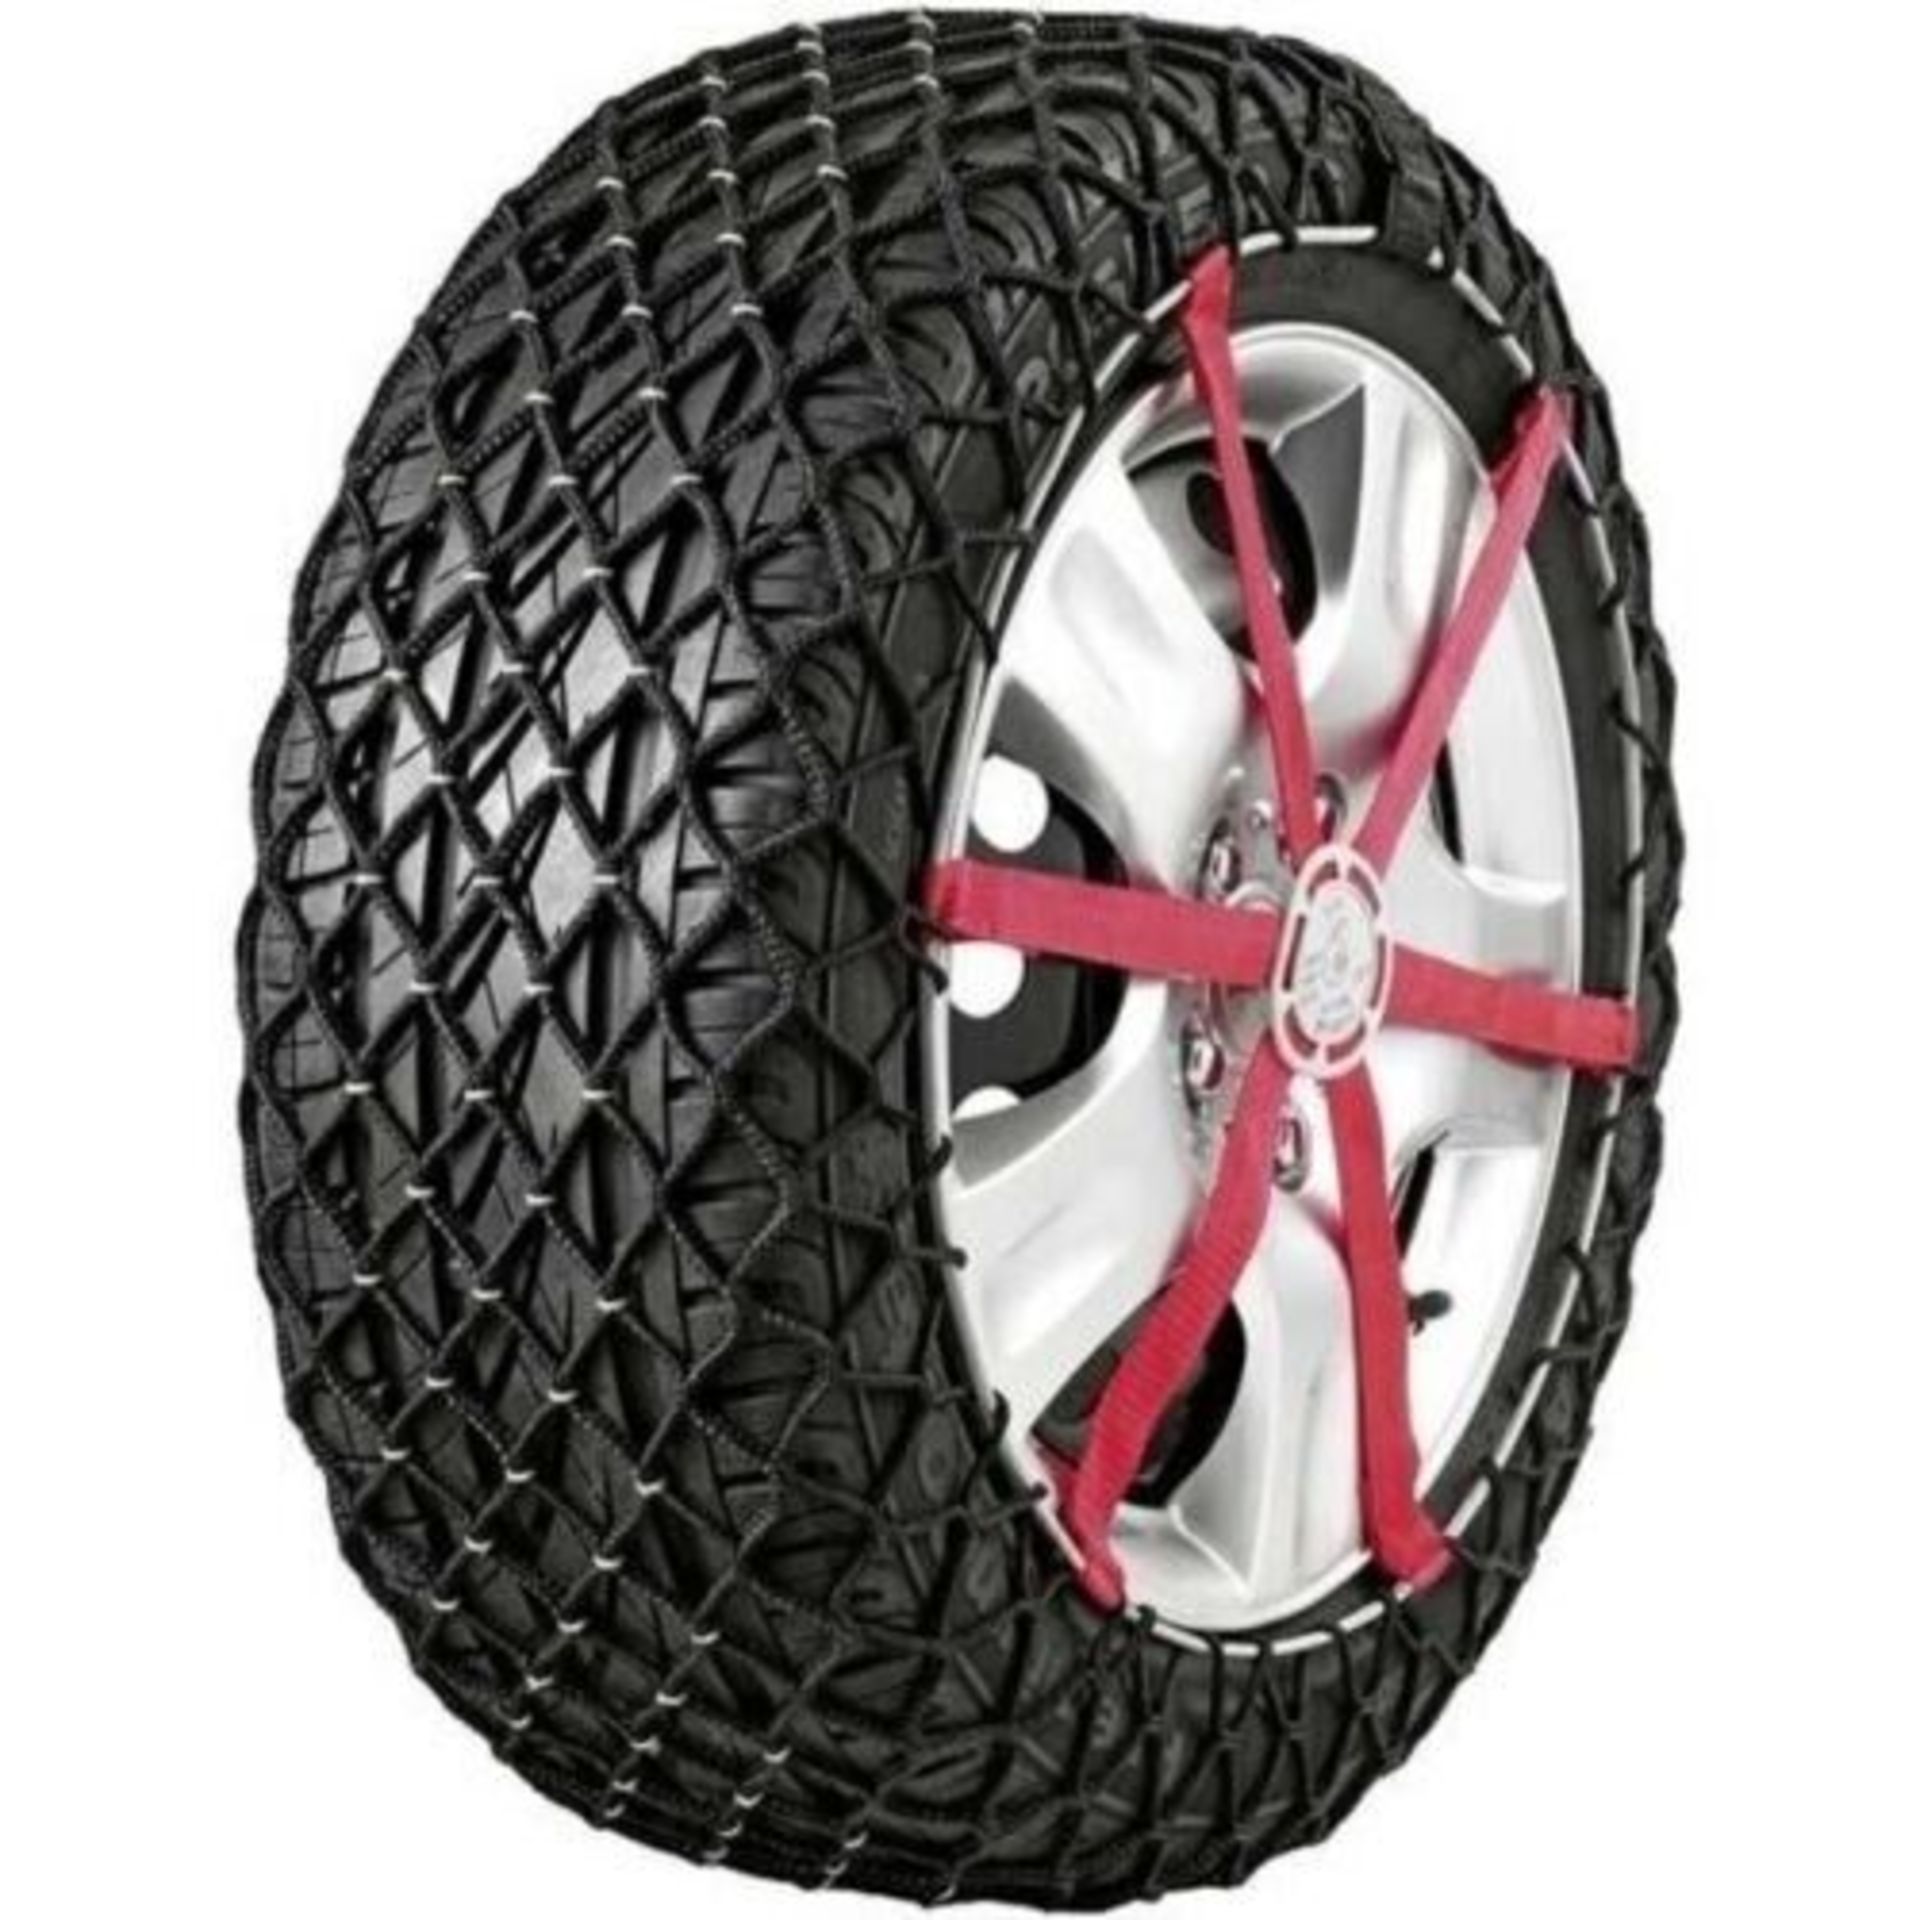 10 X MICHELIN 2 EASY GRIP SNOW CHAINS G13 7900 165/70/14 185/60/14 TYRES - RRP £350 - Image 2 of 2